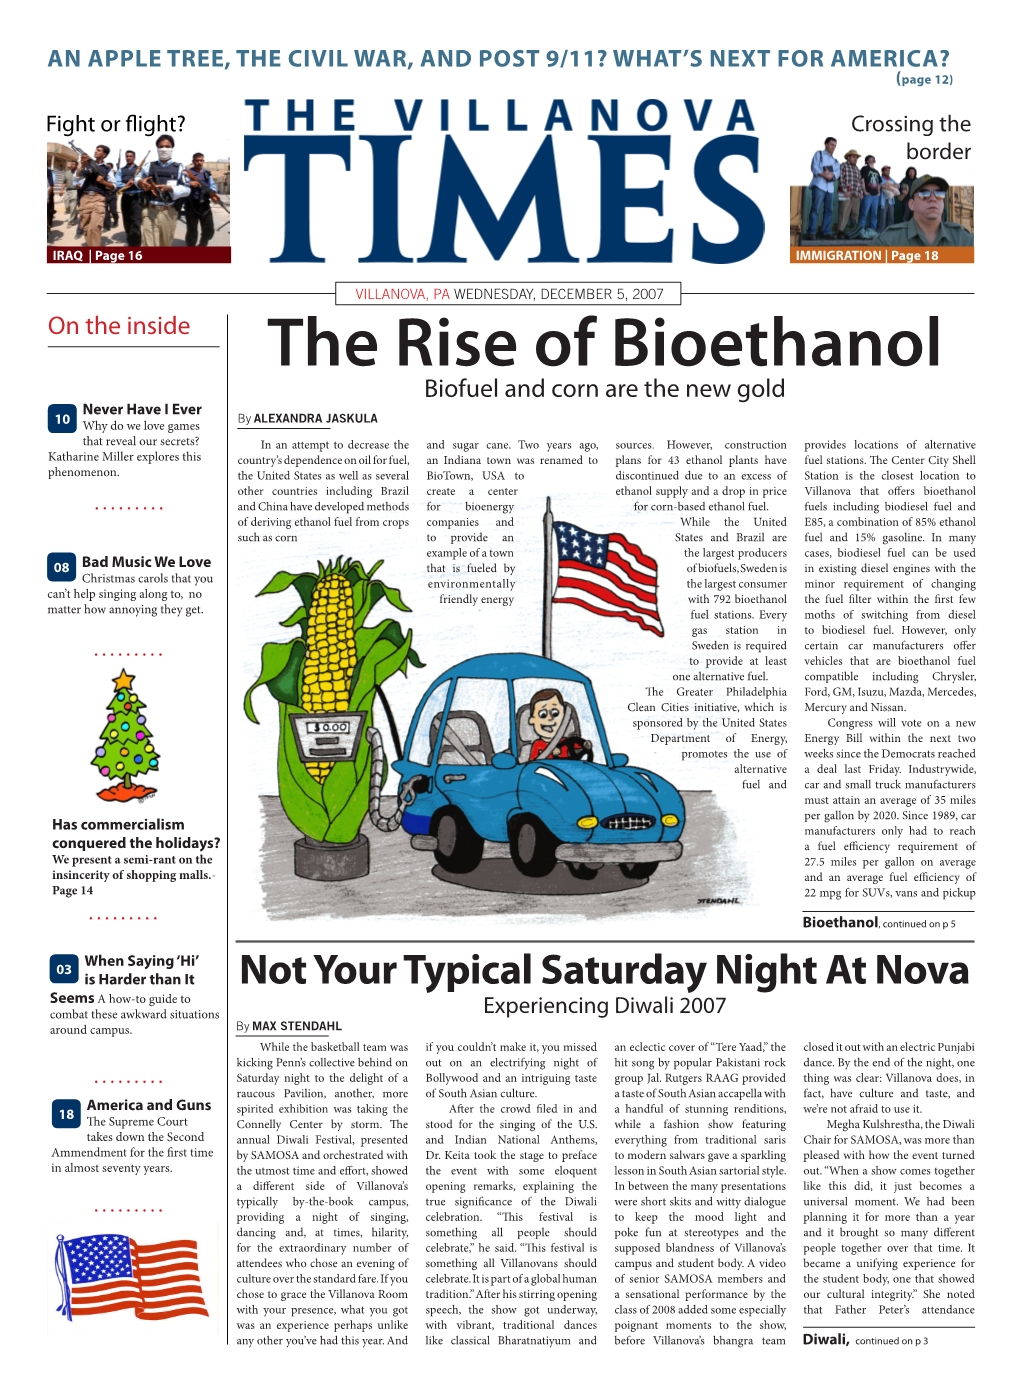 The Rise of Bioethanol